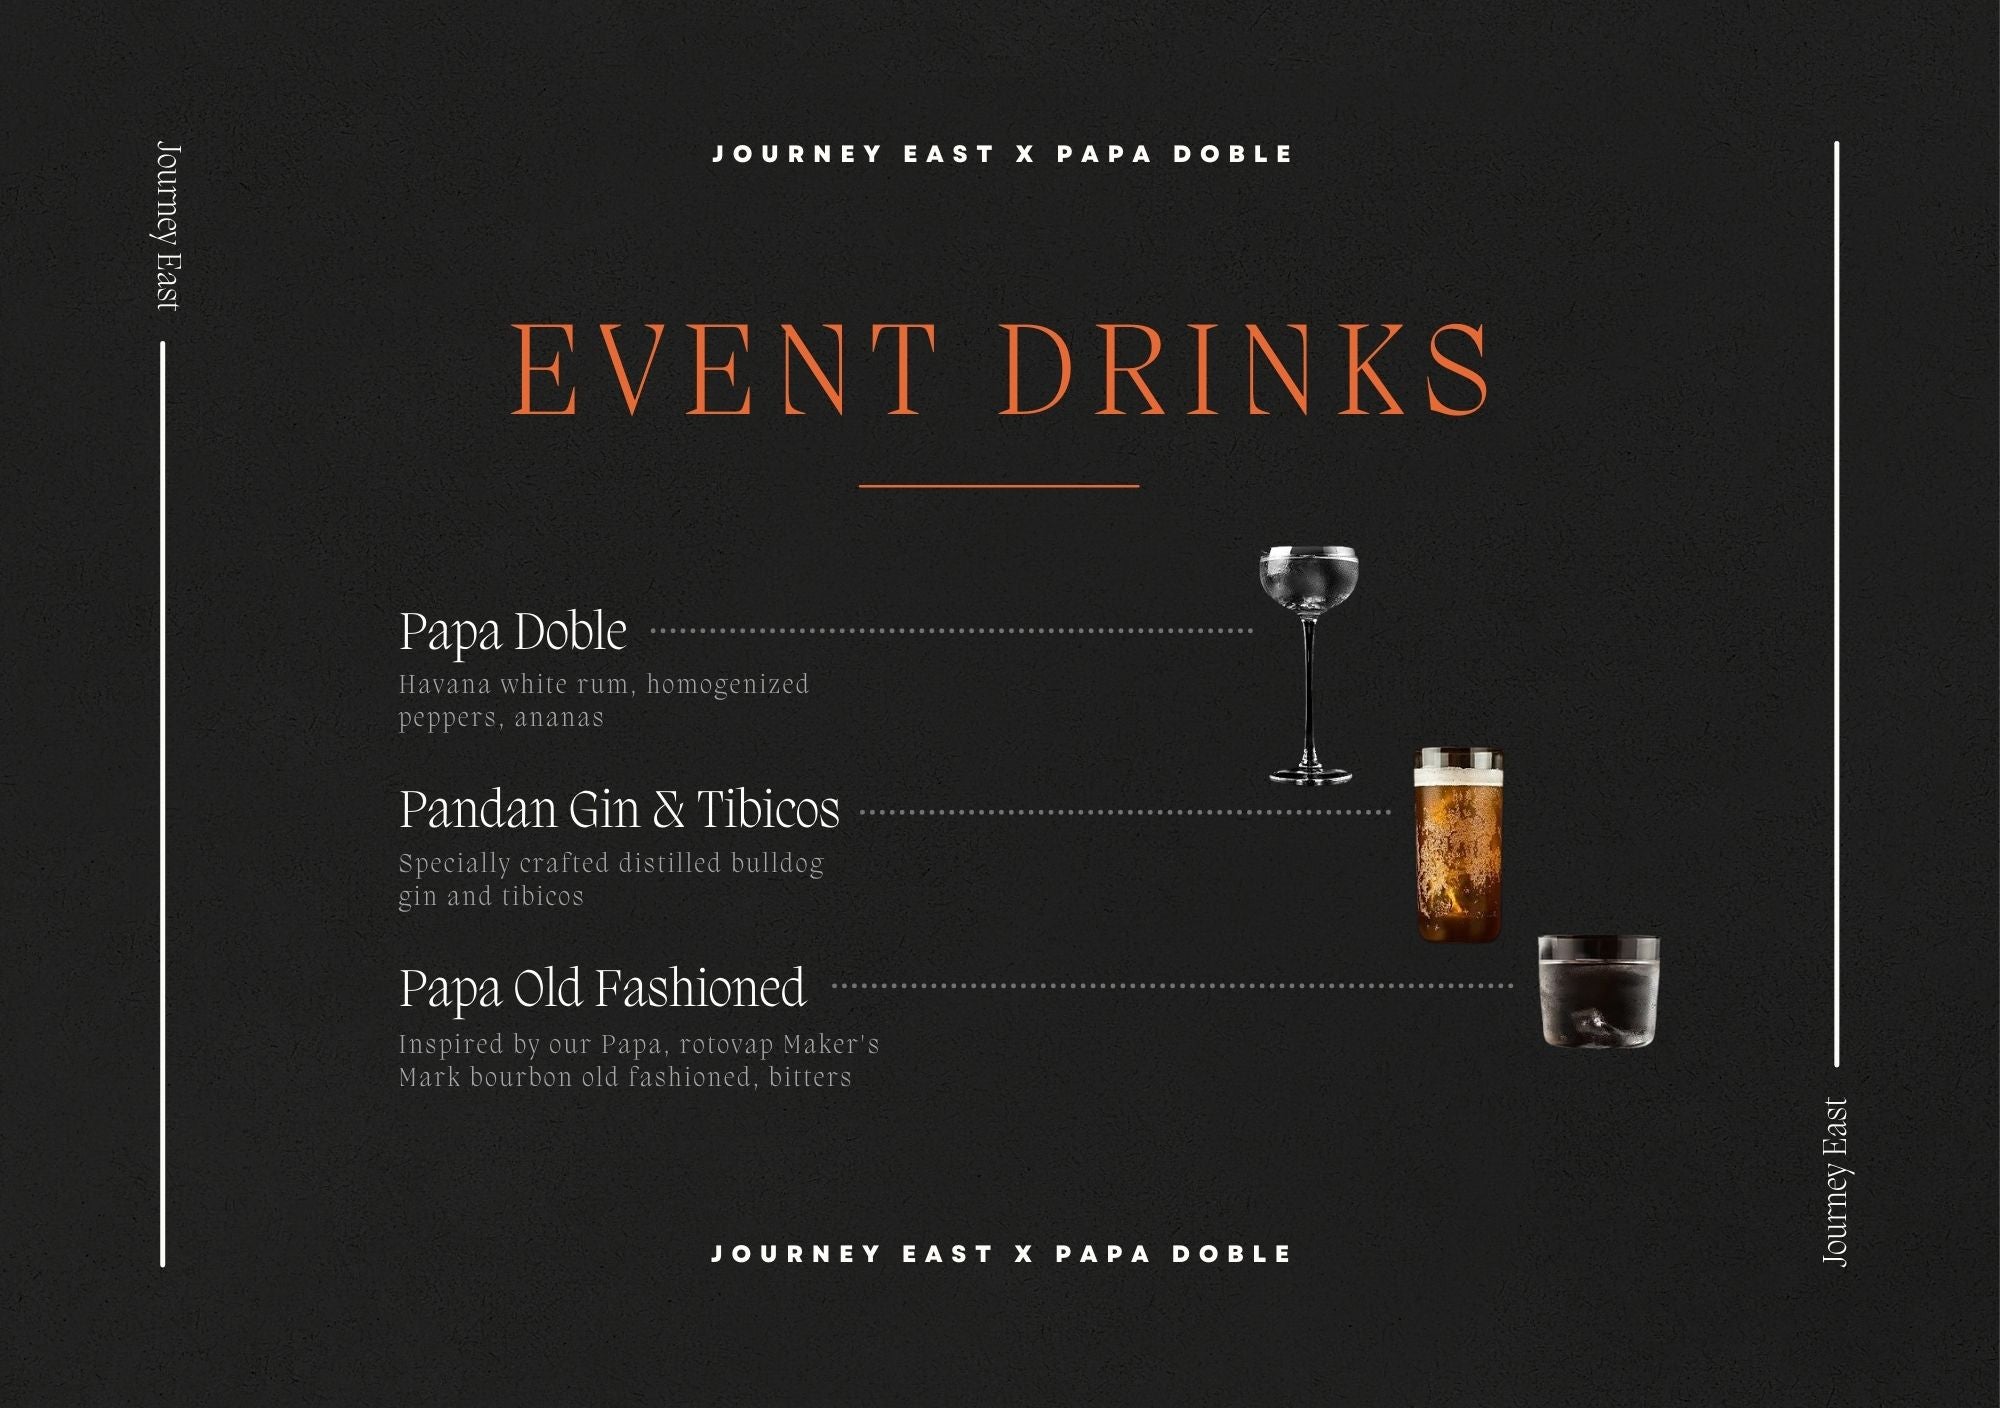 Drink served at the event: Papa Doble, Pandan Gin & Tibicos & Papa Old Fashioned